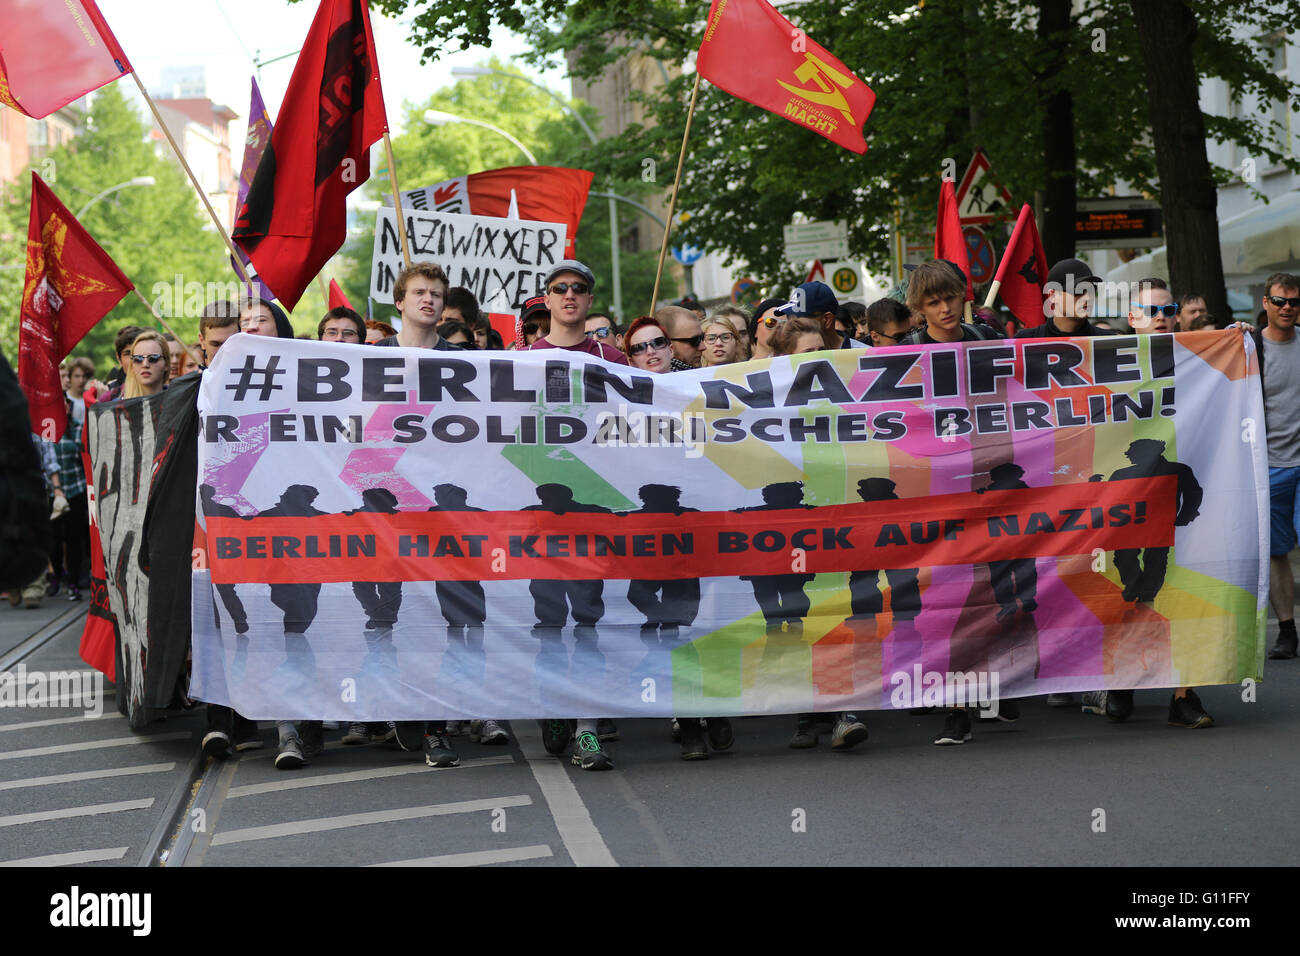 Thousands of anti-fascist campaigners held a counter protest against right-wing groups in Berlin. Hundreds of police lined the streets to prevent the two sides from clashing. Stock Photo